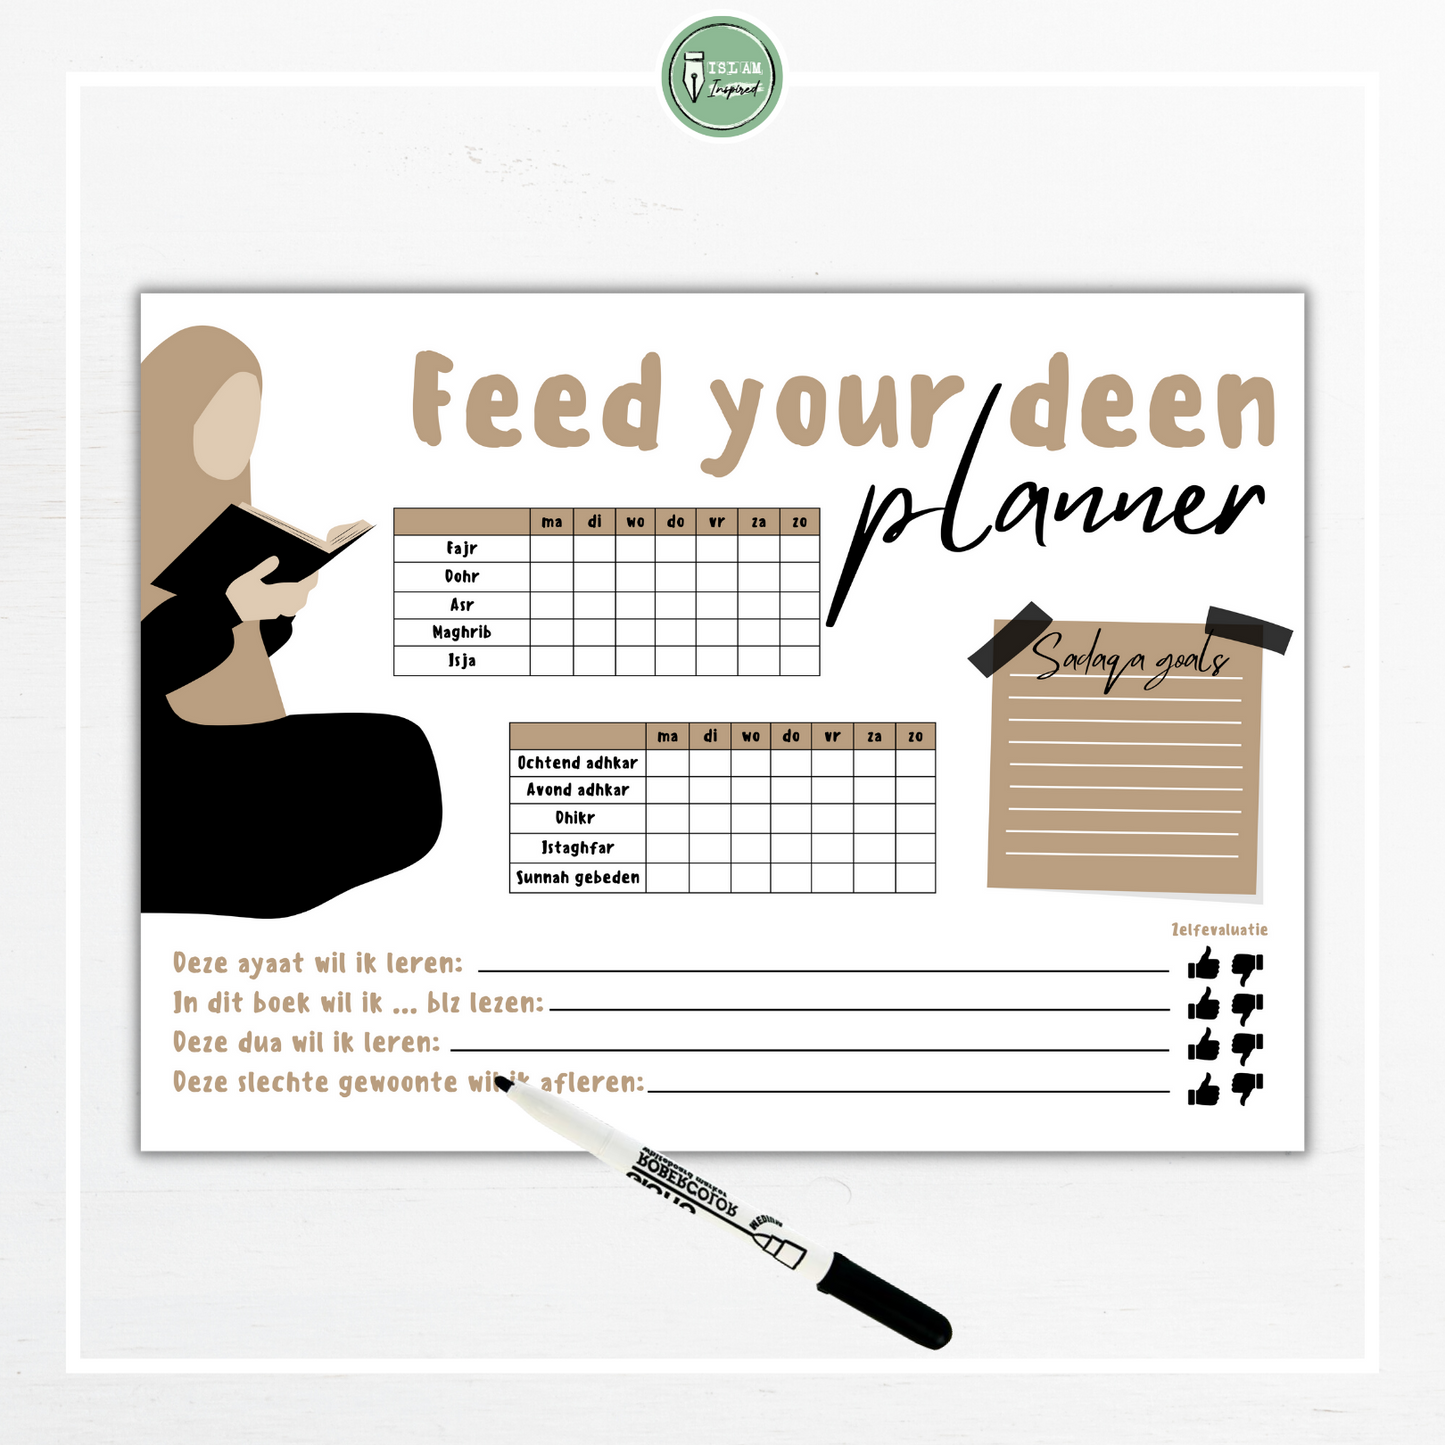 'Feed your deen' planner